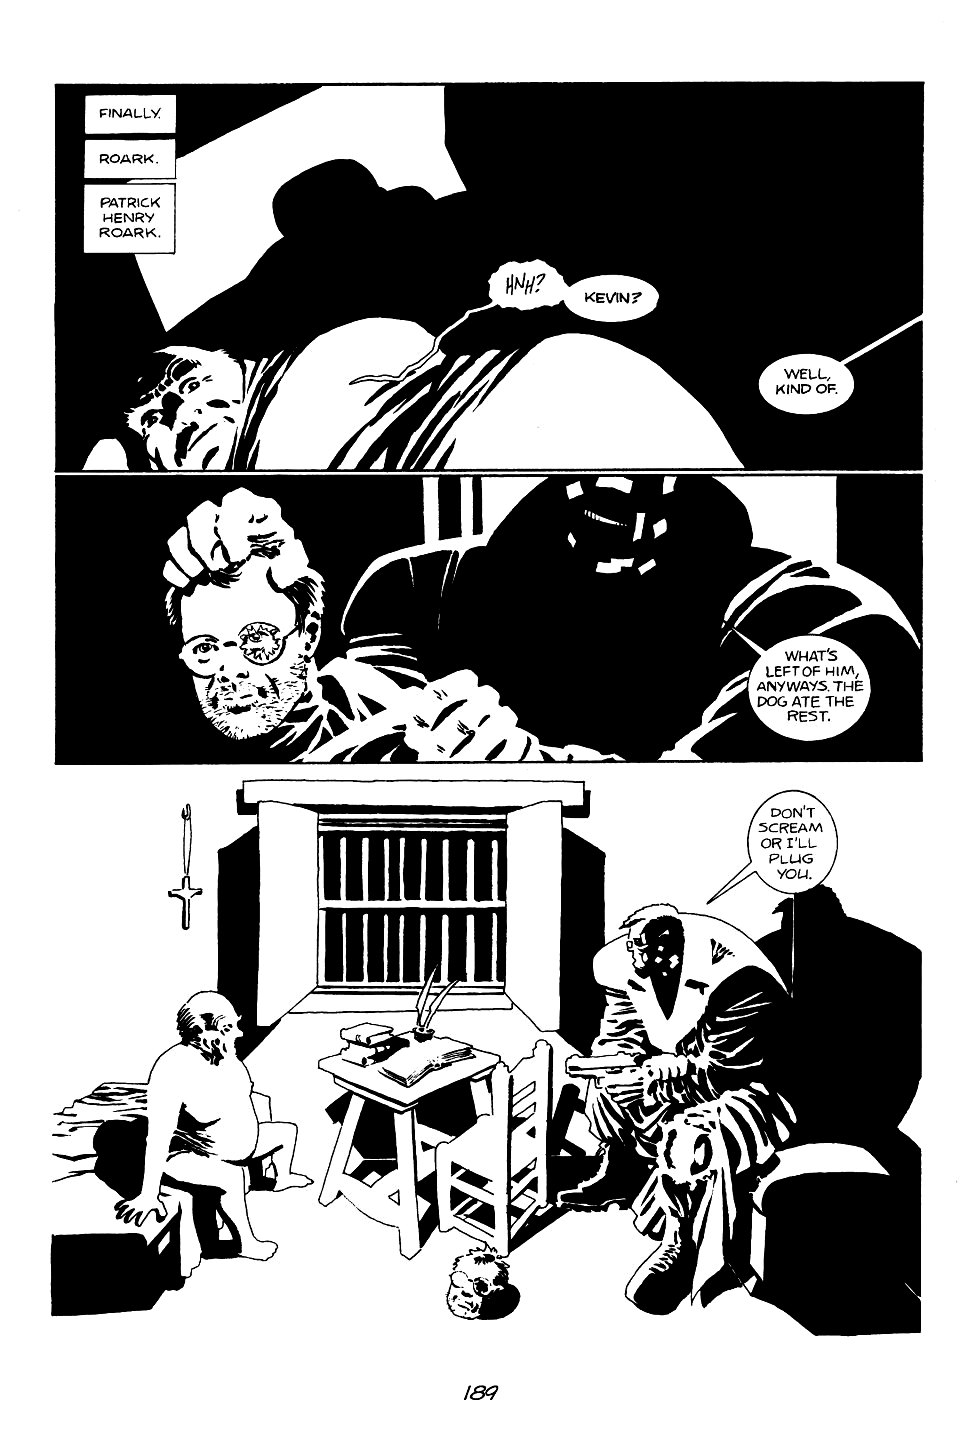 page 189 of sin city 1 the hard goodbye